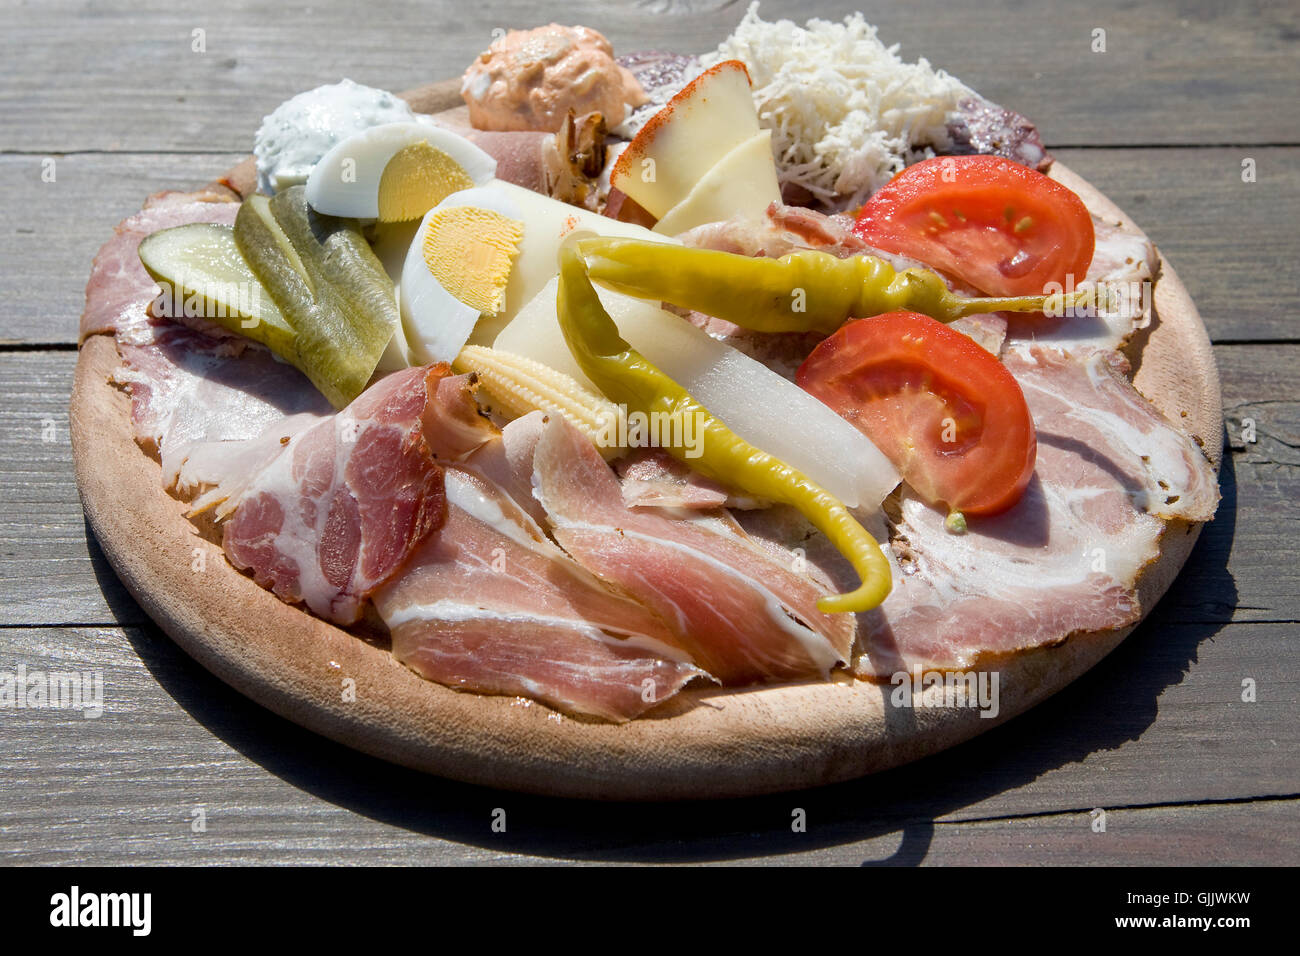 cold cuts plate garnishes Stock Photo